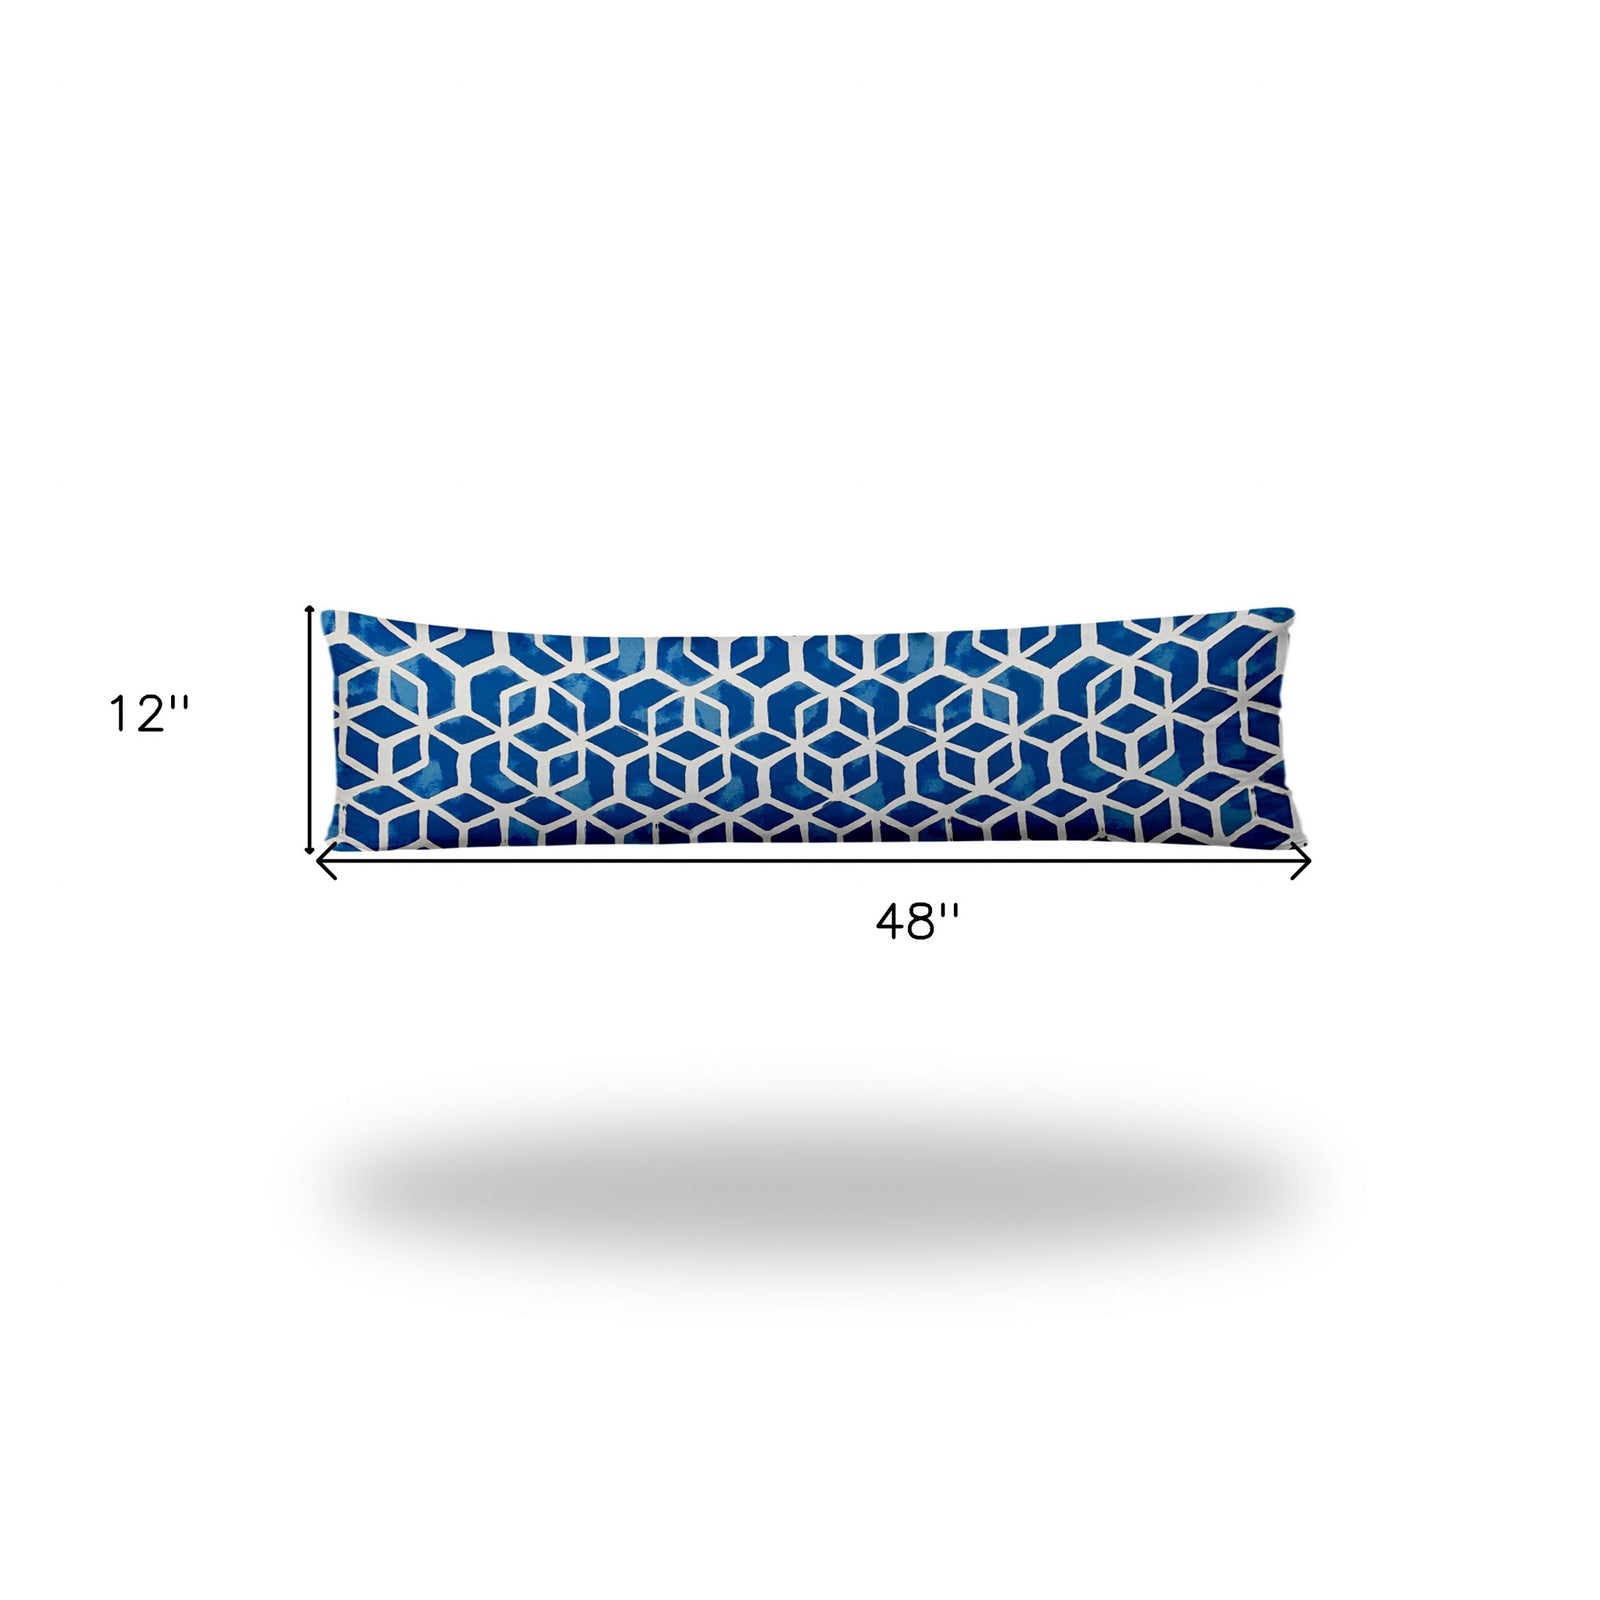 12" X 48" Blue And White Enveloped Honeycomb Lumbar Indoor Outdoor Pillow Cover